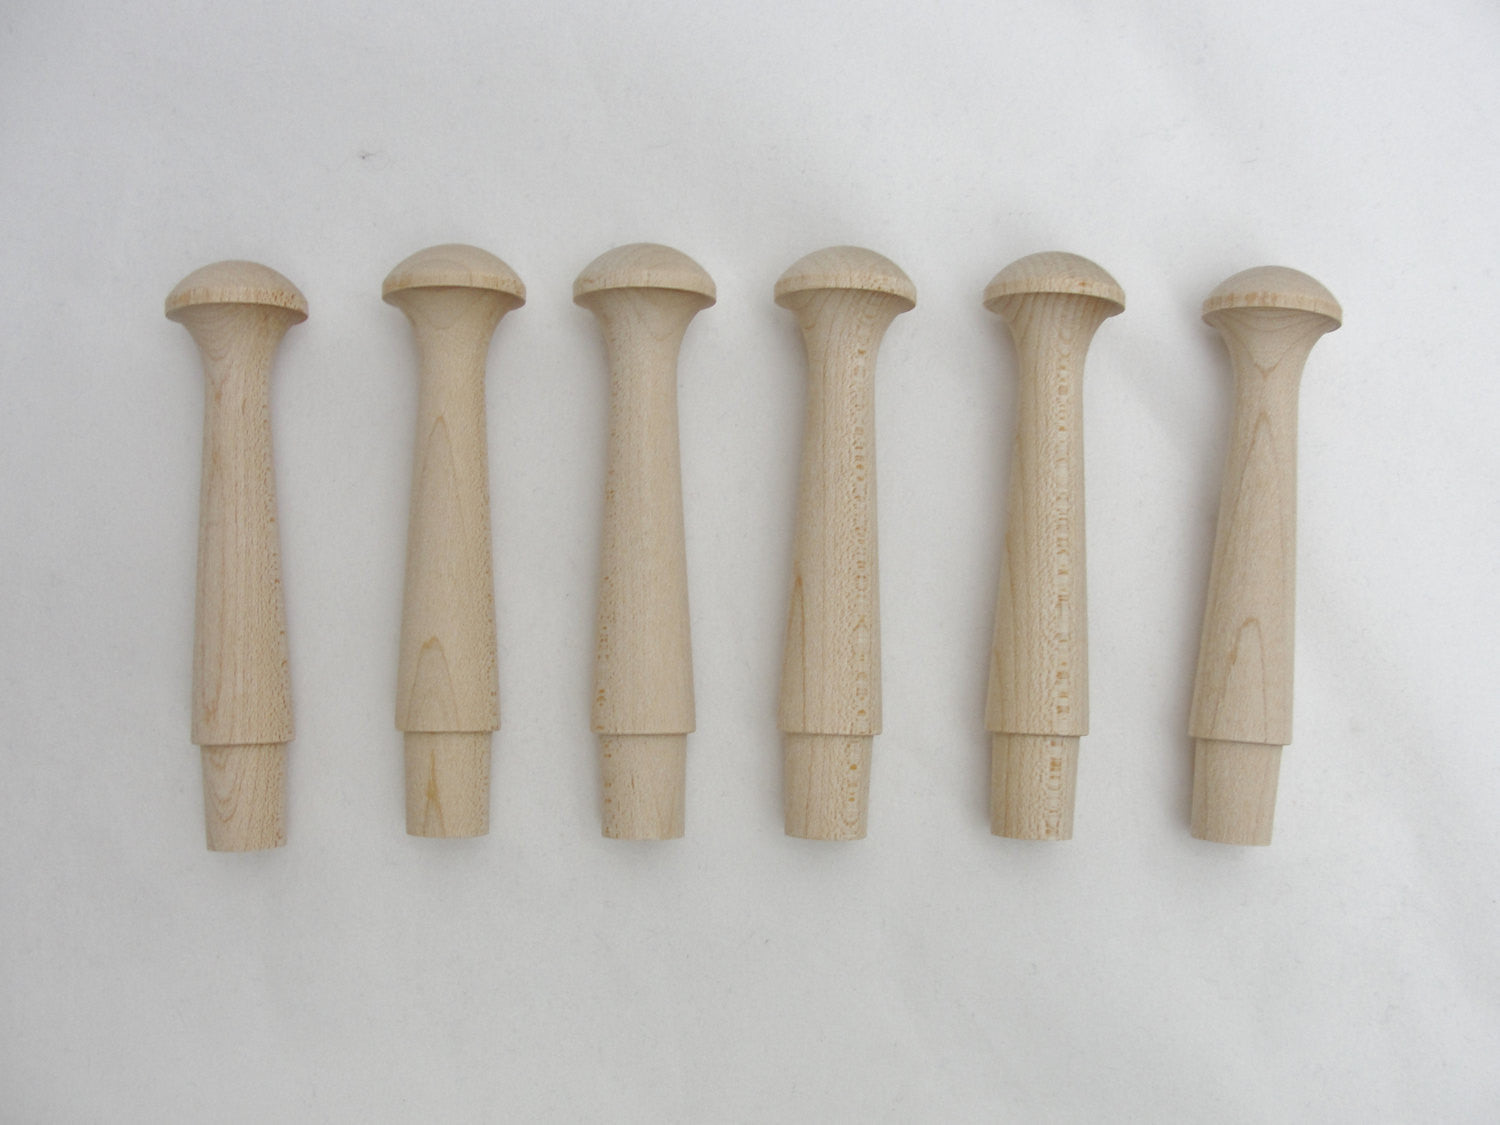 Large shaker pegs 3 1/2" set of 6 - Wood parts - Craft Supply House